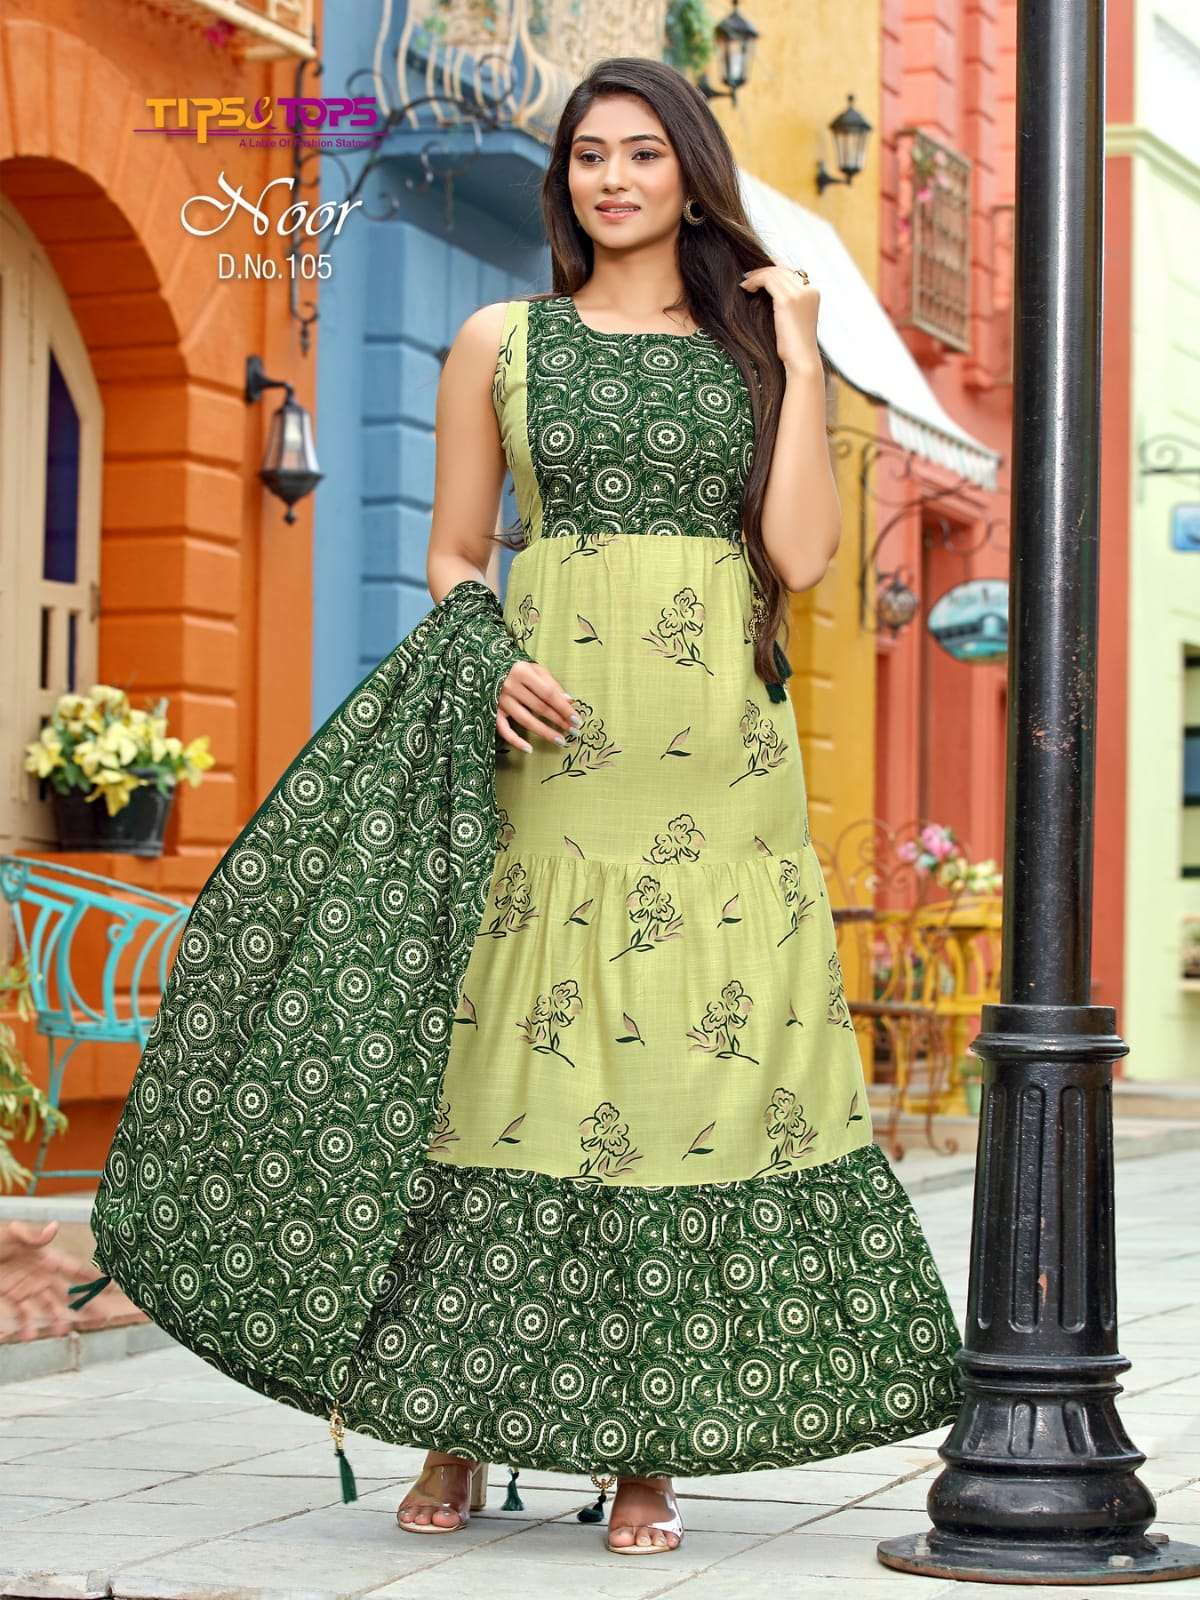 Buy SATRAT's Women Girls Casual Regular Long Knee Length Double Shade Green  Cotton Handloom Striped Kurti Chinese Collar Neck Sleeveless Half Sleeves  Provided Separately Optional. Latest High Quality Office Wear Design Today